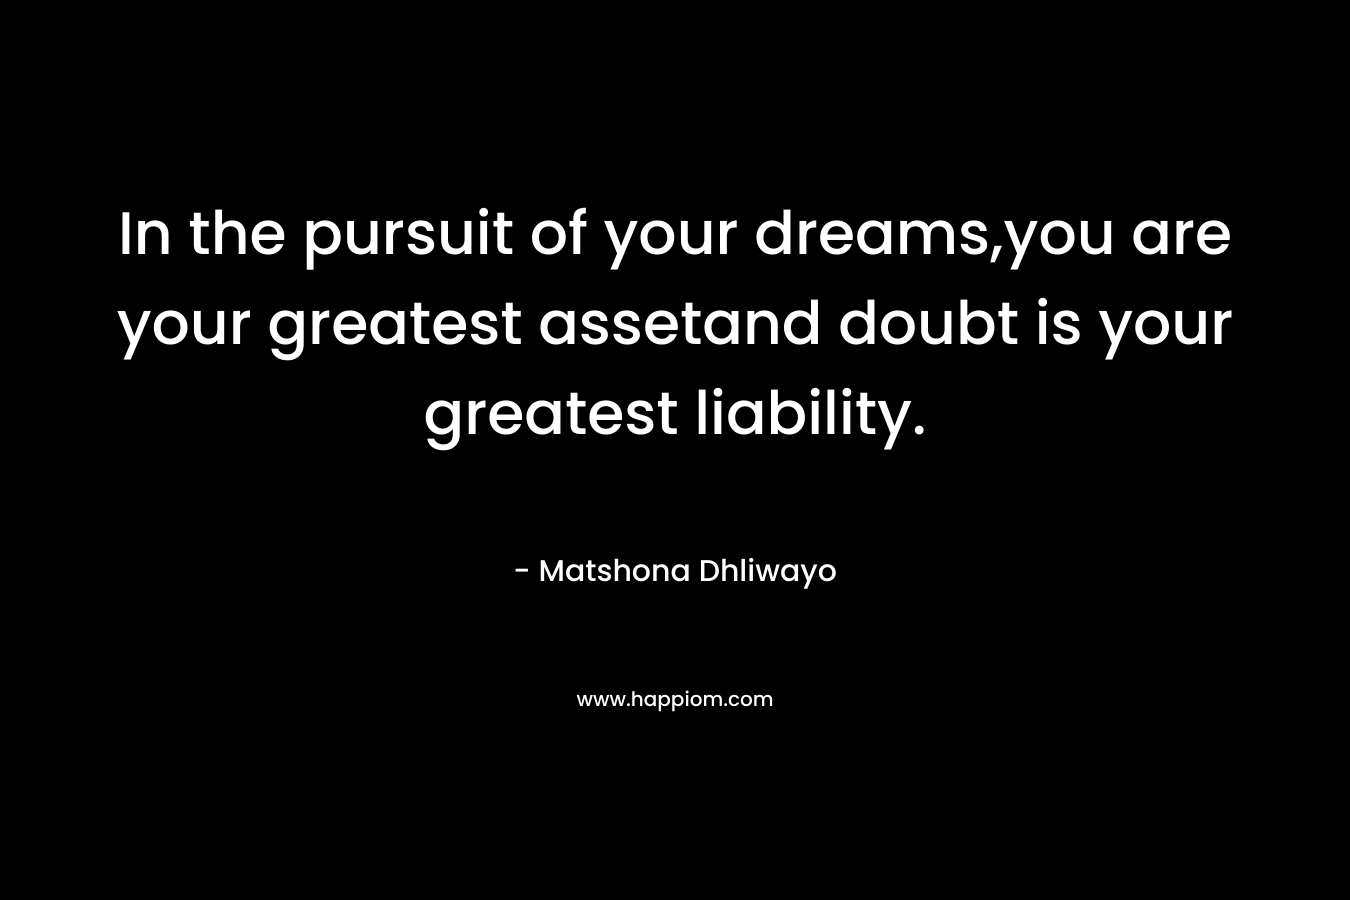 In the pursuit of your dreams,you are your greatest assetand doubt is your greatest liability. – Matshona Dhliwayo